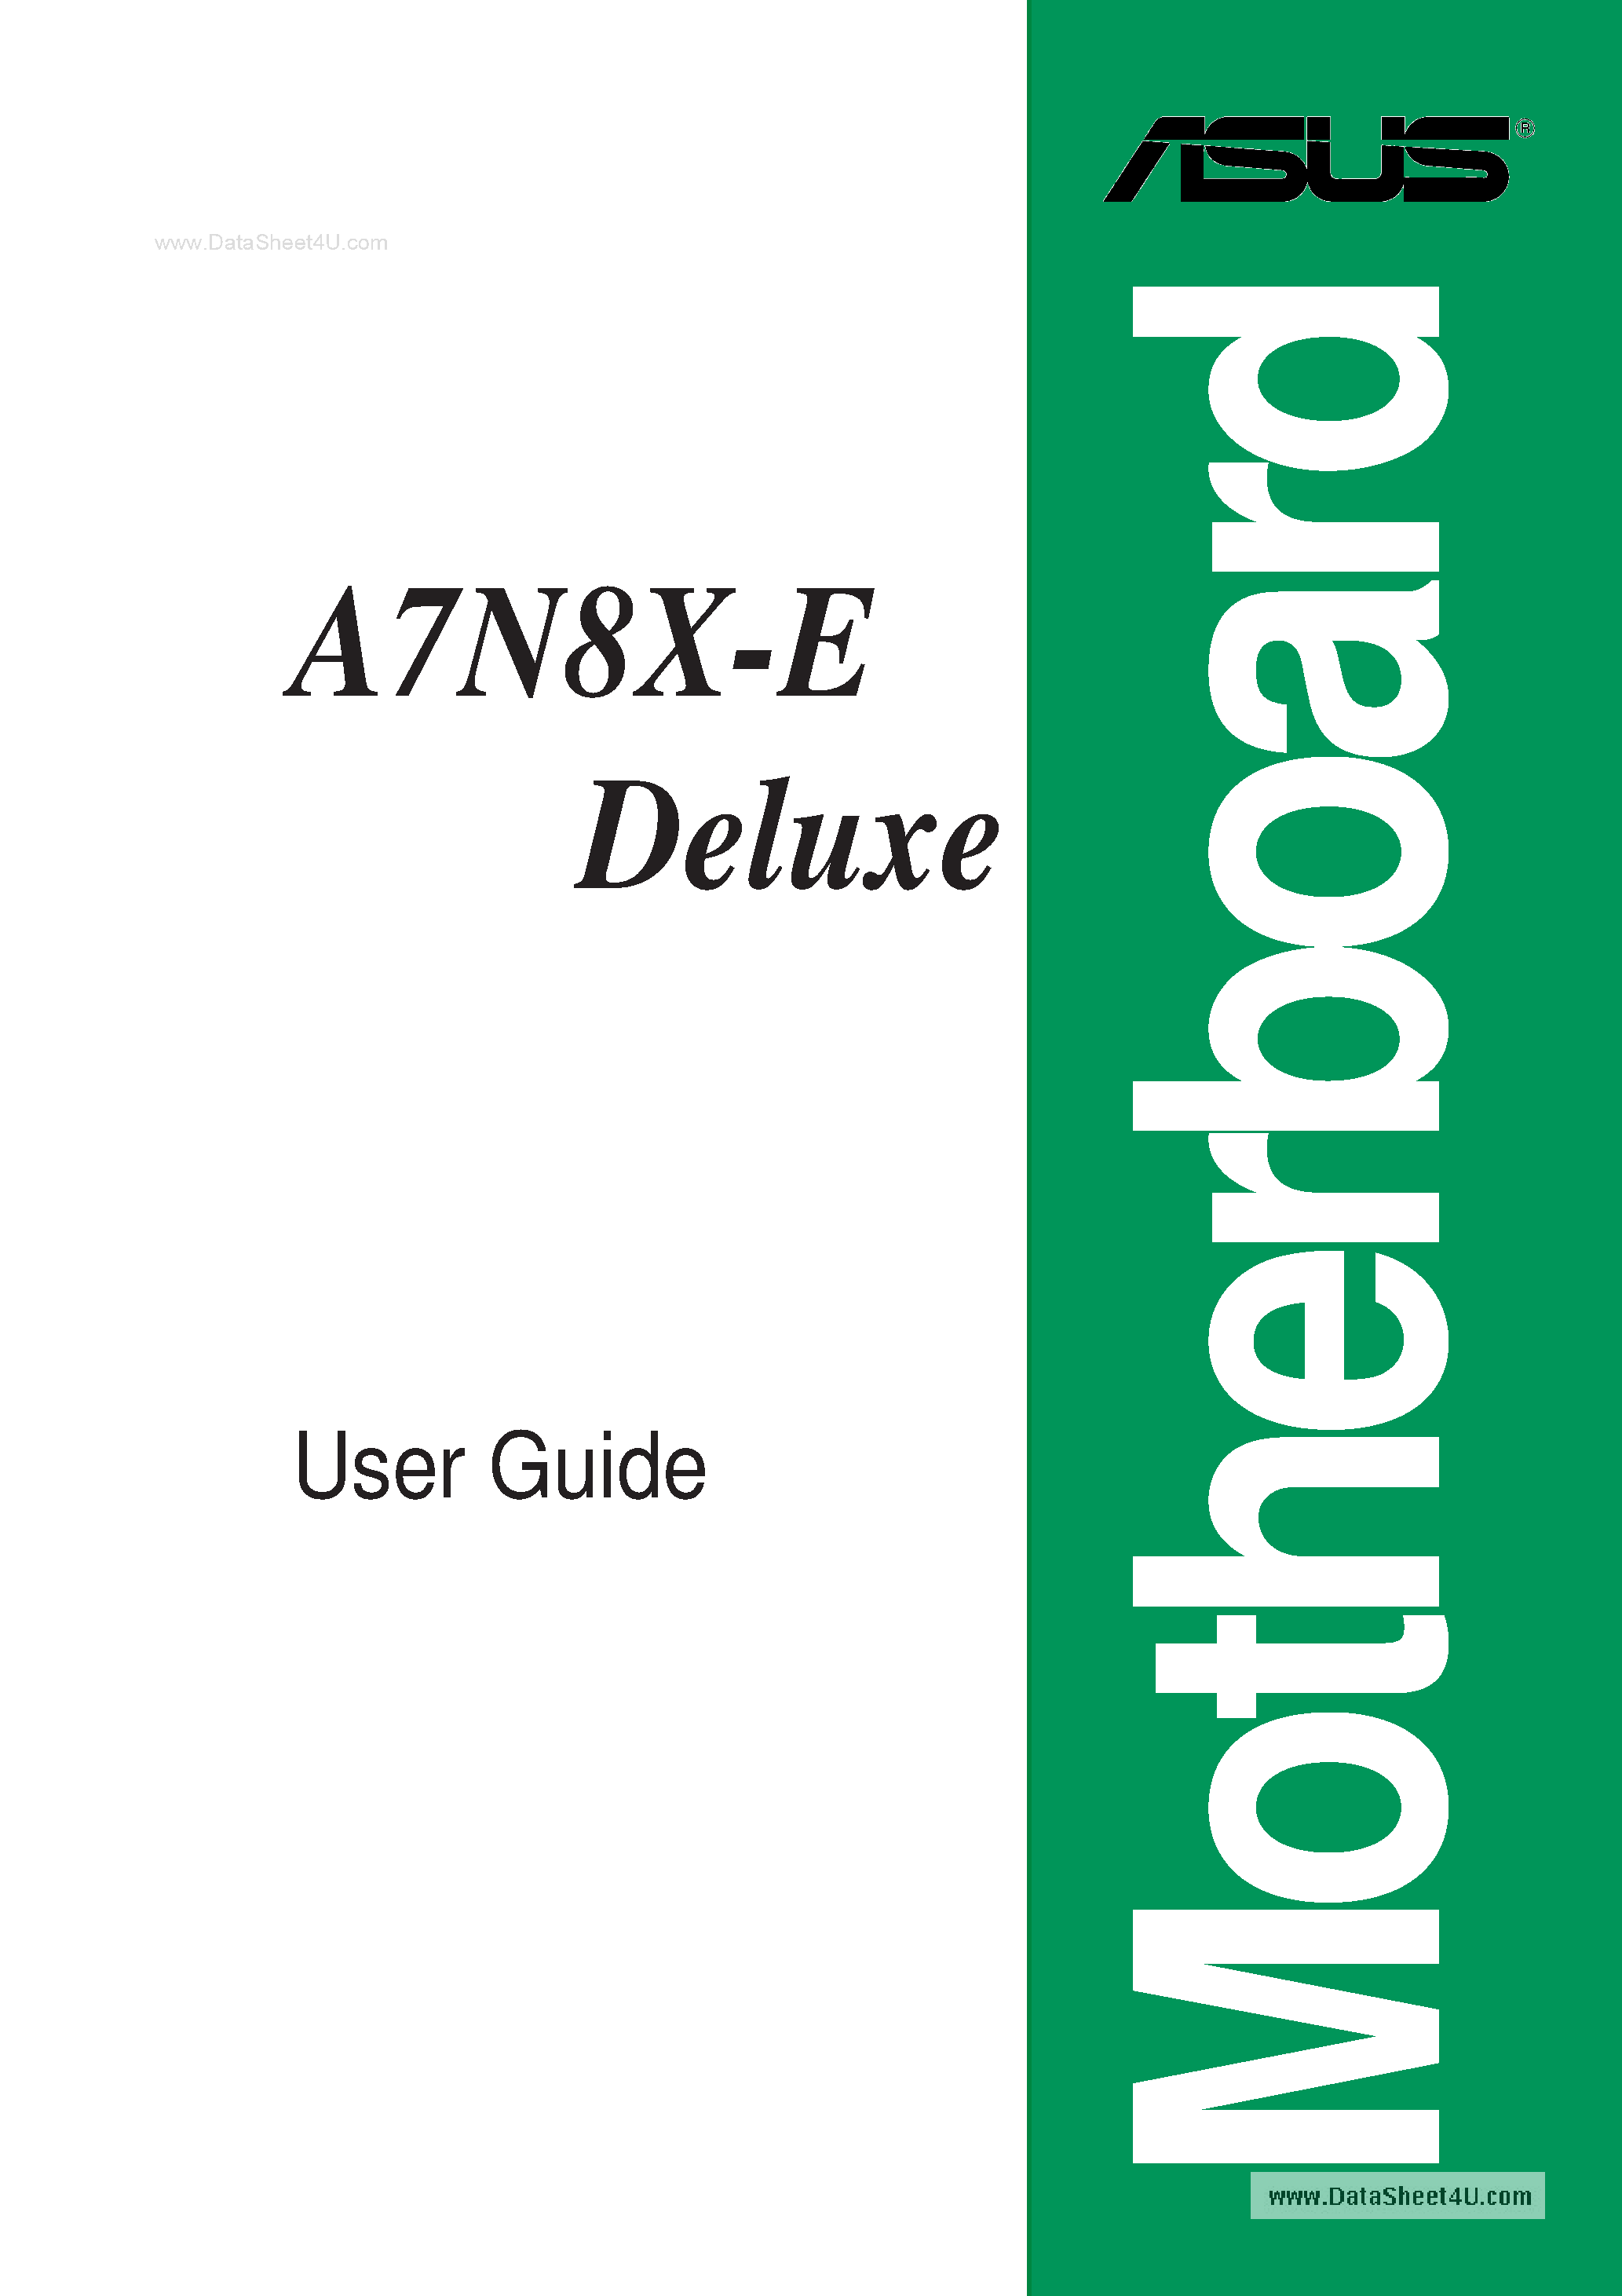 Datasheet A7N8X-E - Mother Board page 1